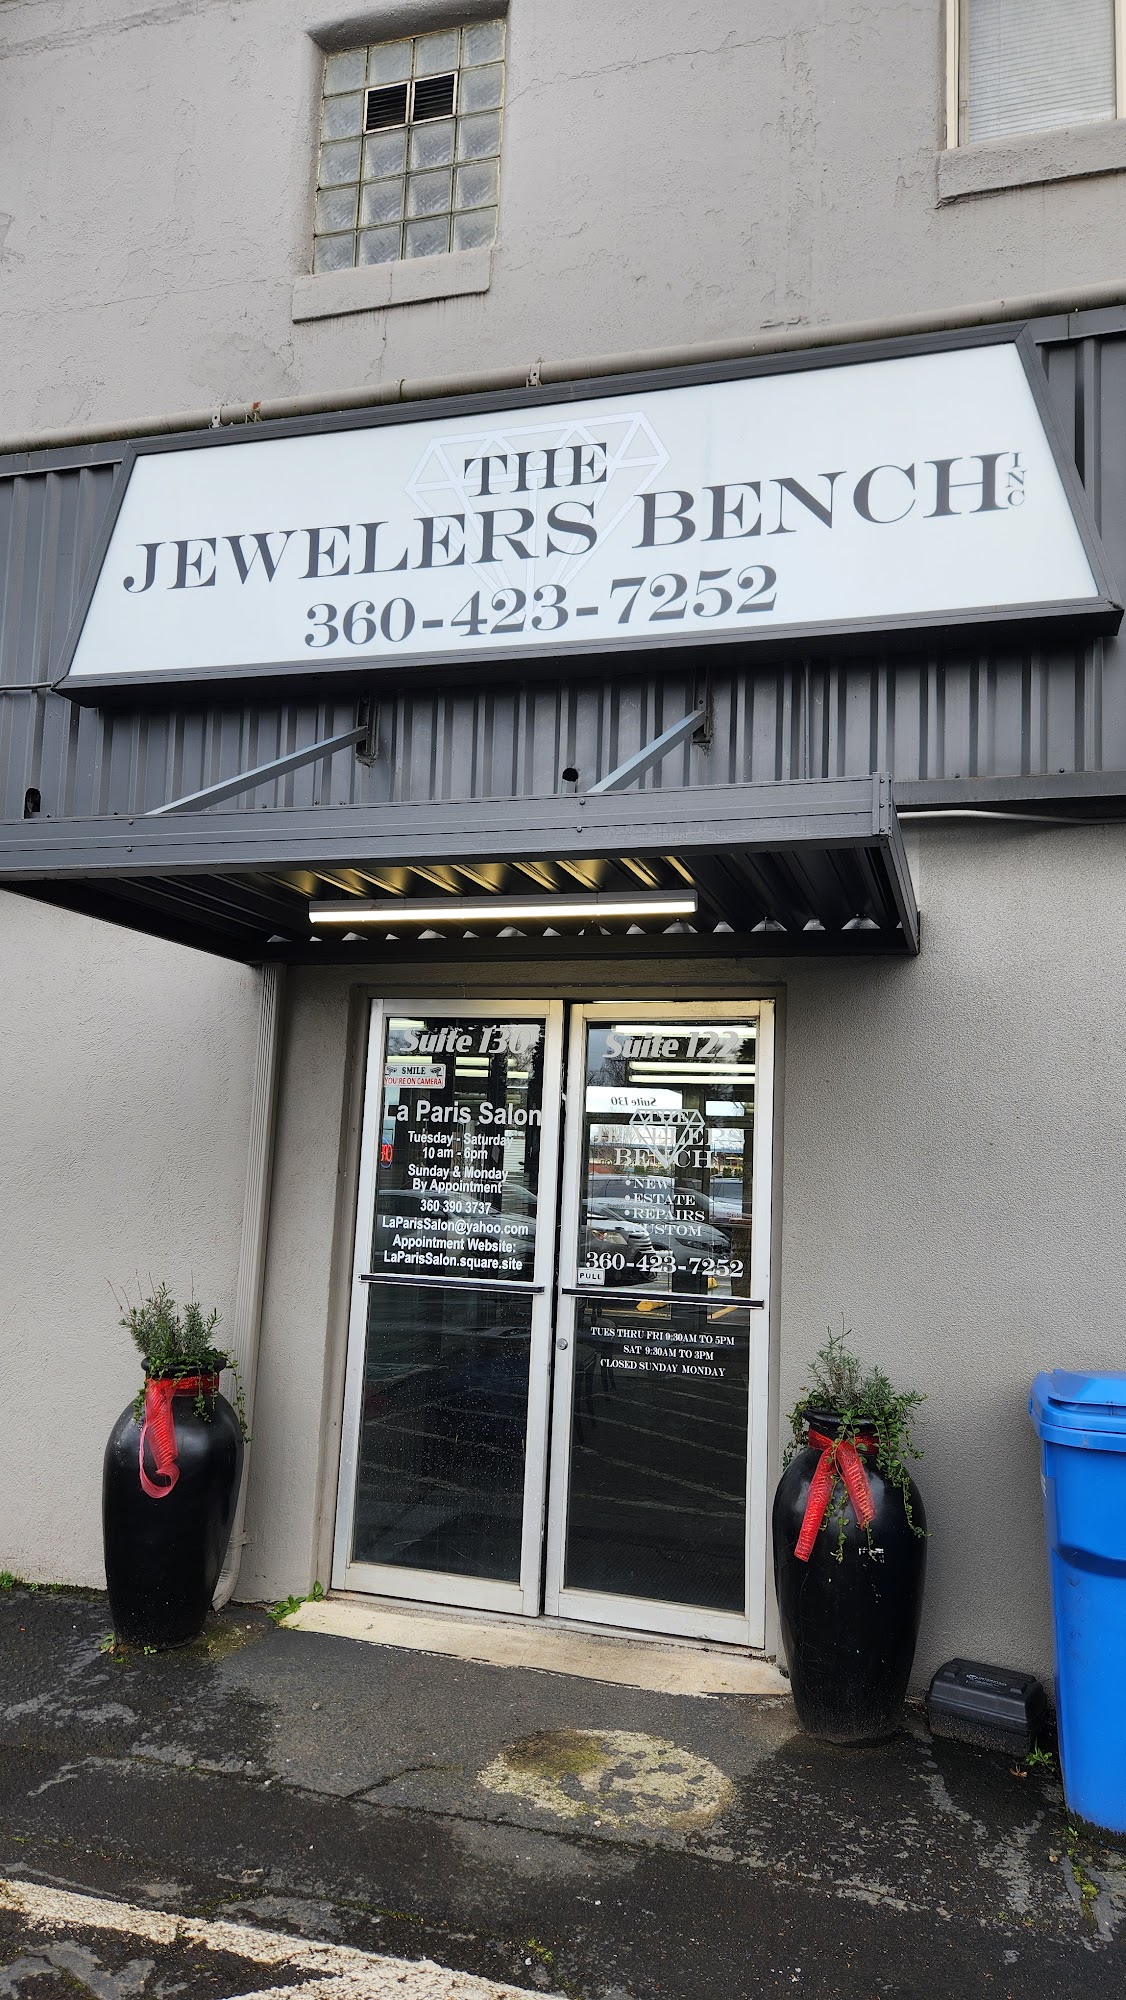 The Jewelers Bench, Inc